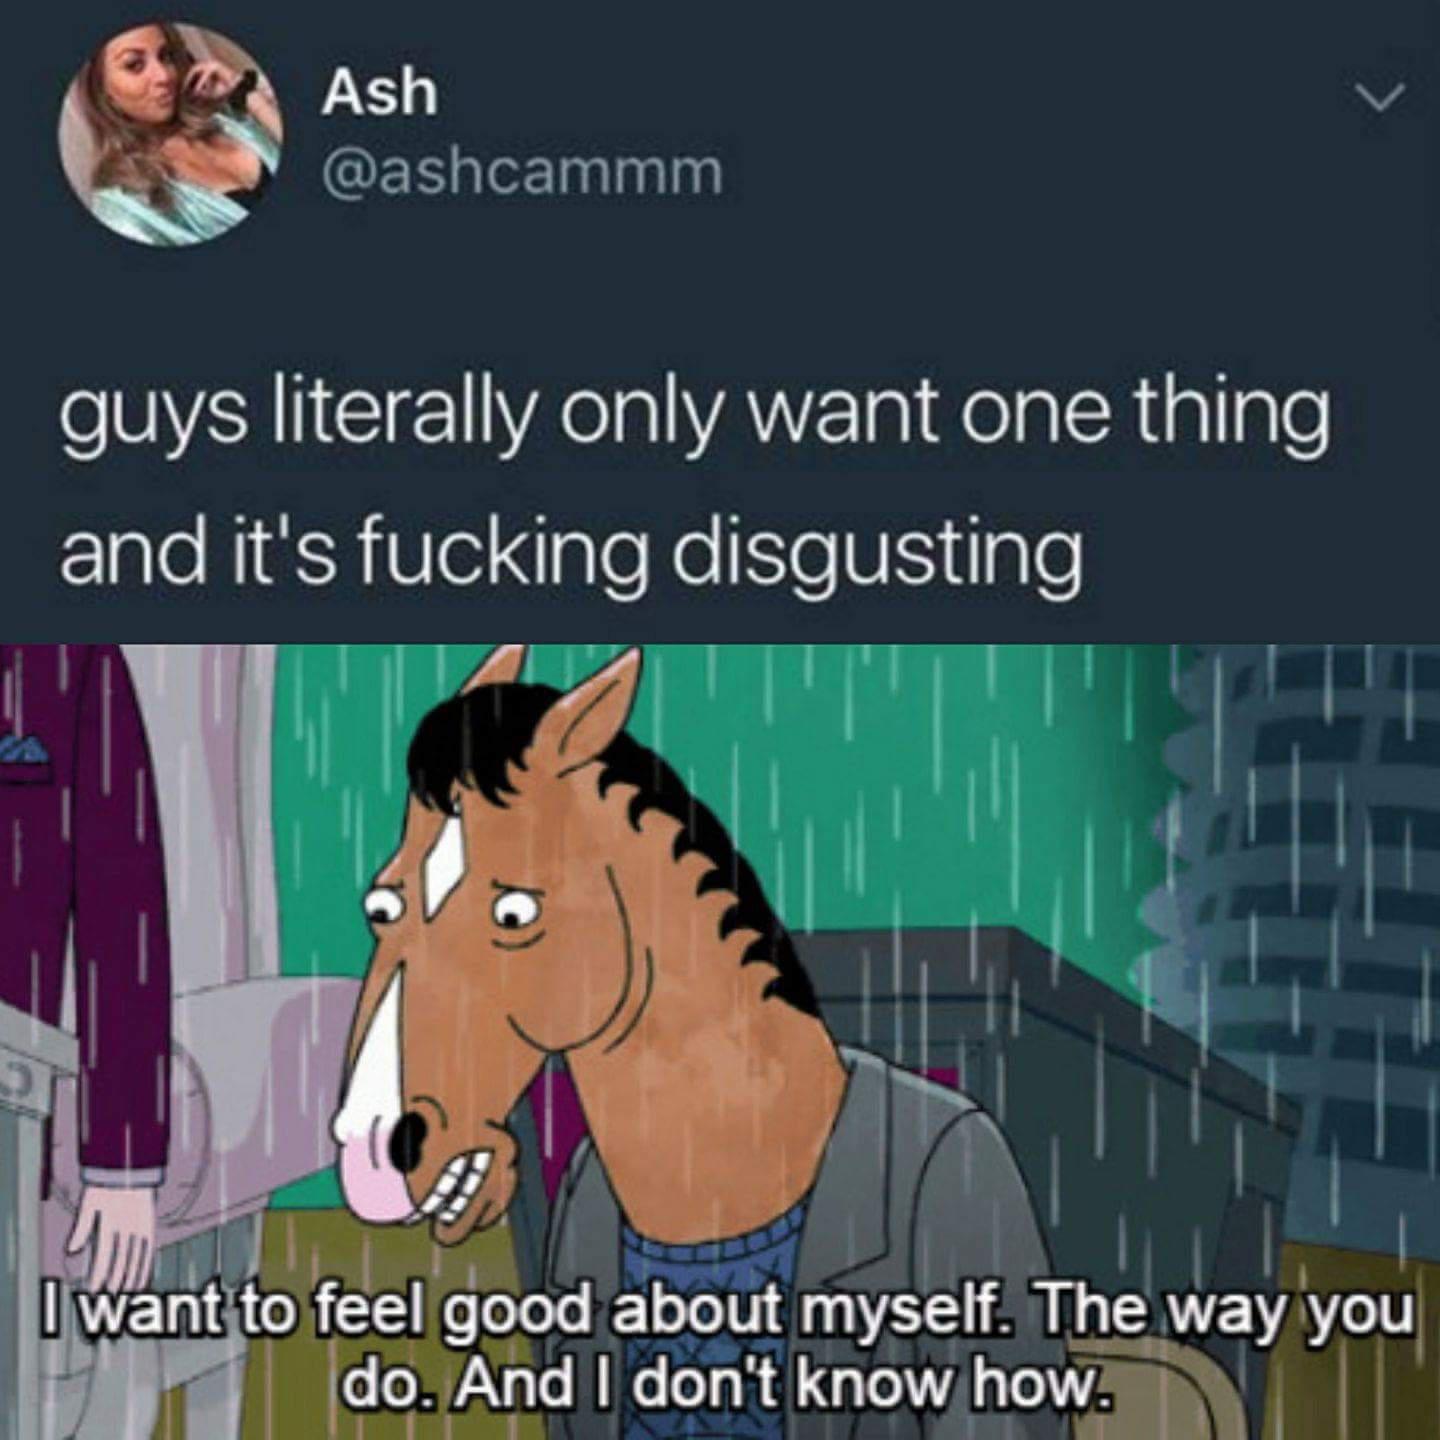 depression depression-memes depression text: Ash @ashcammm guys literally only want one thing and it's fucking disgusting bwa@to feel good about myself. The way you < Il IdooAnd I don't know how. 